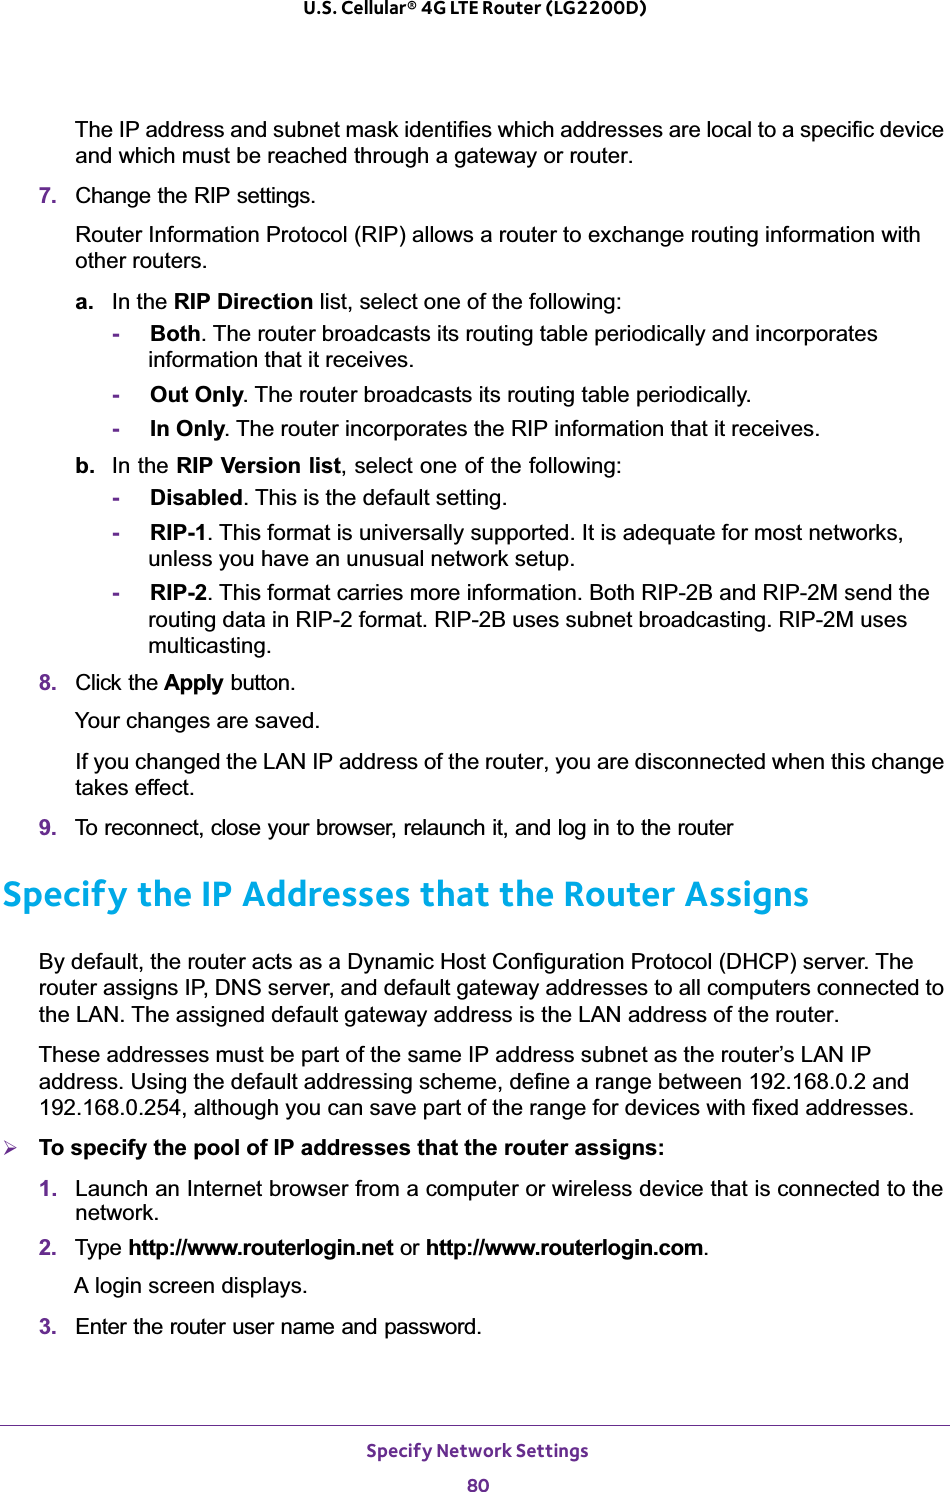 Specify Network Settings80U.S. Cellular® 4G LTE Router (LG2200D) The IP address and subnet mask identifies which addresses are local to a specific device and which must be reached through a gateway or router.7. Change the RIP settings.Router Information Protocol (RIP) allows a router to exchange routing information with other routers. a. In the RIP Direction list, select one of the following:-Both. The router broadcasts its routing table periodically and incorporates information that it receives.-Out Only. The router broadcasts its routing table periodically. -In Only. The router incorporates the RIP information that it receives.b. In the RIP Version list, select one of the following:-Disabled. This is the default setting. -RIP-1. This format is universally supported. It is adequate for most networks, unless you have an unusual network setup. -RIP-2. This format carries more information. Both RIP-2B and RIP-2M send the routing data in RIP-2 format. RIP-2B uses subnet broadcasting. RIP-2M uses multicasting.8. Click the Apply button.Your changes are saved.If you changed the LAN IP address of the router, you are disconnected when this change takes effect.9. To reconnect, close your browser, relaunch it, and log in to the routerSpecify the IP Addresses that the Router AssignsBy default, the router acts as a Dynamic Host Configuration Protocol (DHCP) server. The router assigns IP, DNS server, and default gateway addresses to all computers connected to the LAN. The assigned default gateway address is the LAN address of the router. These addresses must be part of the same IP address subnet as the router’s LAN IP address. Using the default addressing scheme, define a range between 192.168.0.2 and 192.168.0.254, although you can save part of the range for devices with fixed addresses.¾To specify the pool of IP addresses that the router assigns:1. Launch an Internet browser from a computer or wireless device that is connected to the network.2. Type http://www.routerlogin.net or http://www.routerlogin.com.A login screen displays.3. Enter the router user name and password.